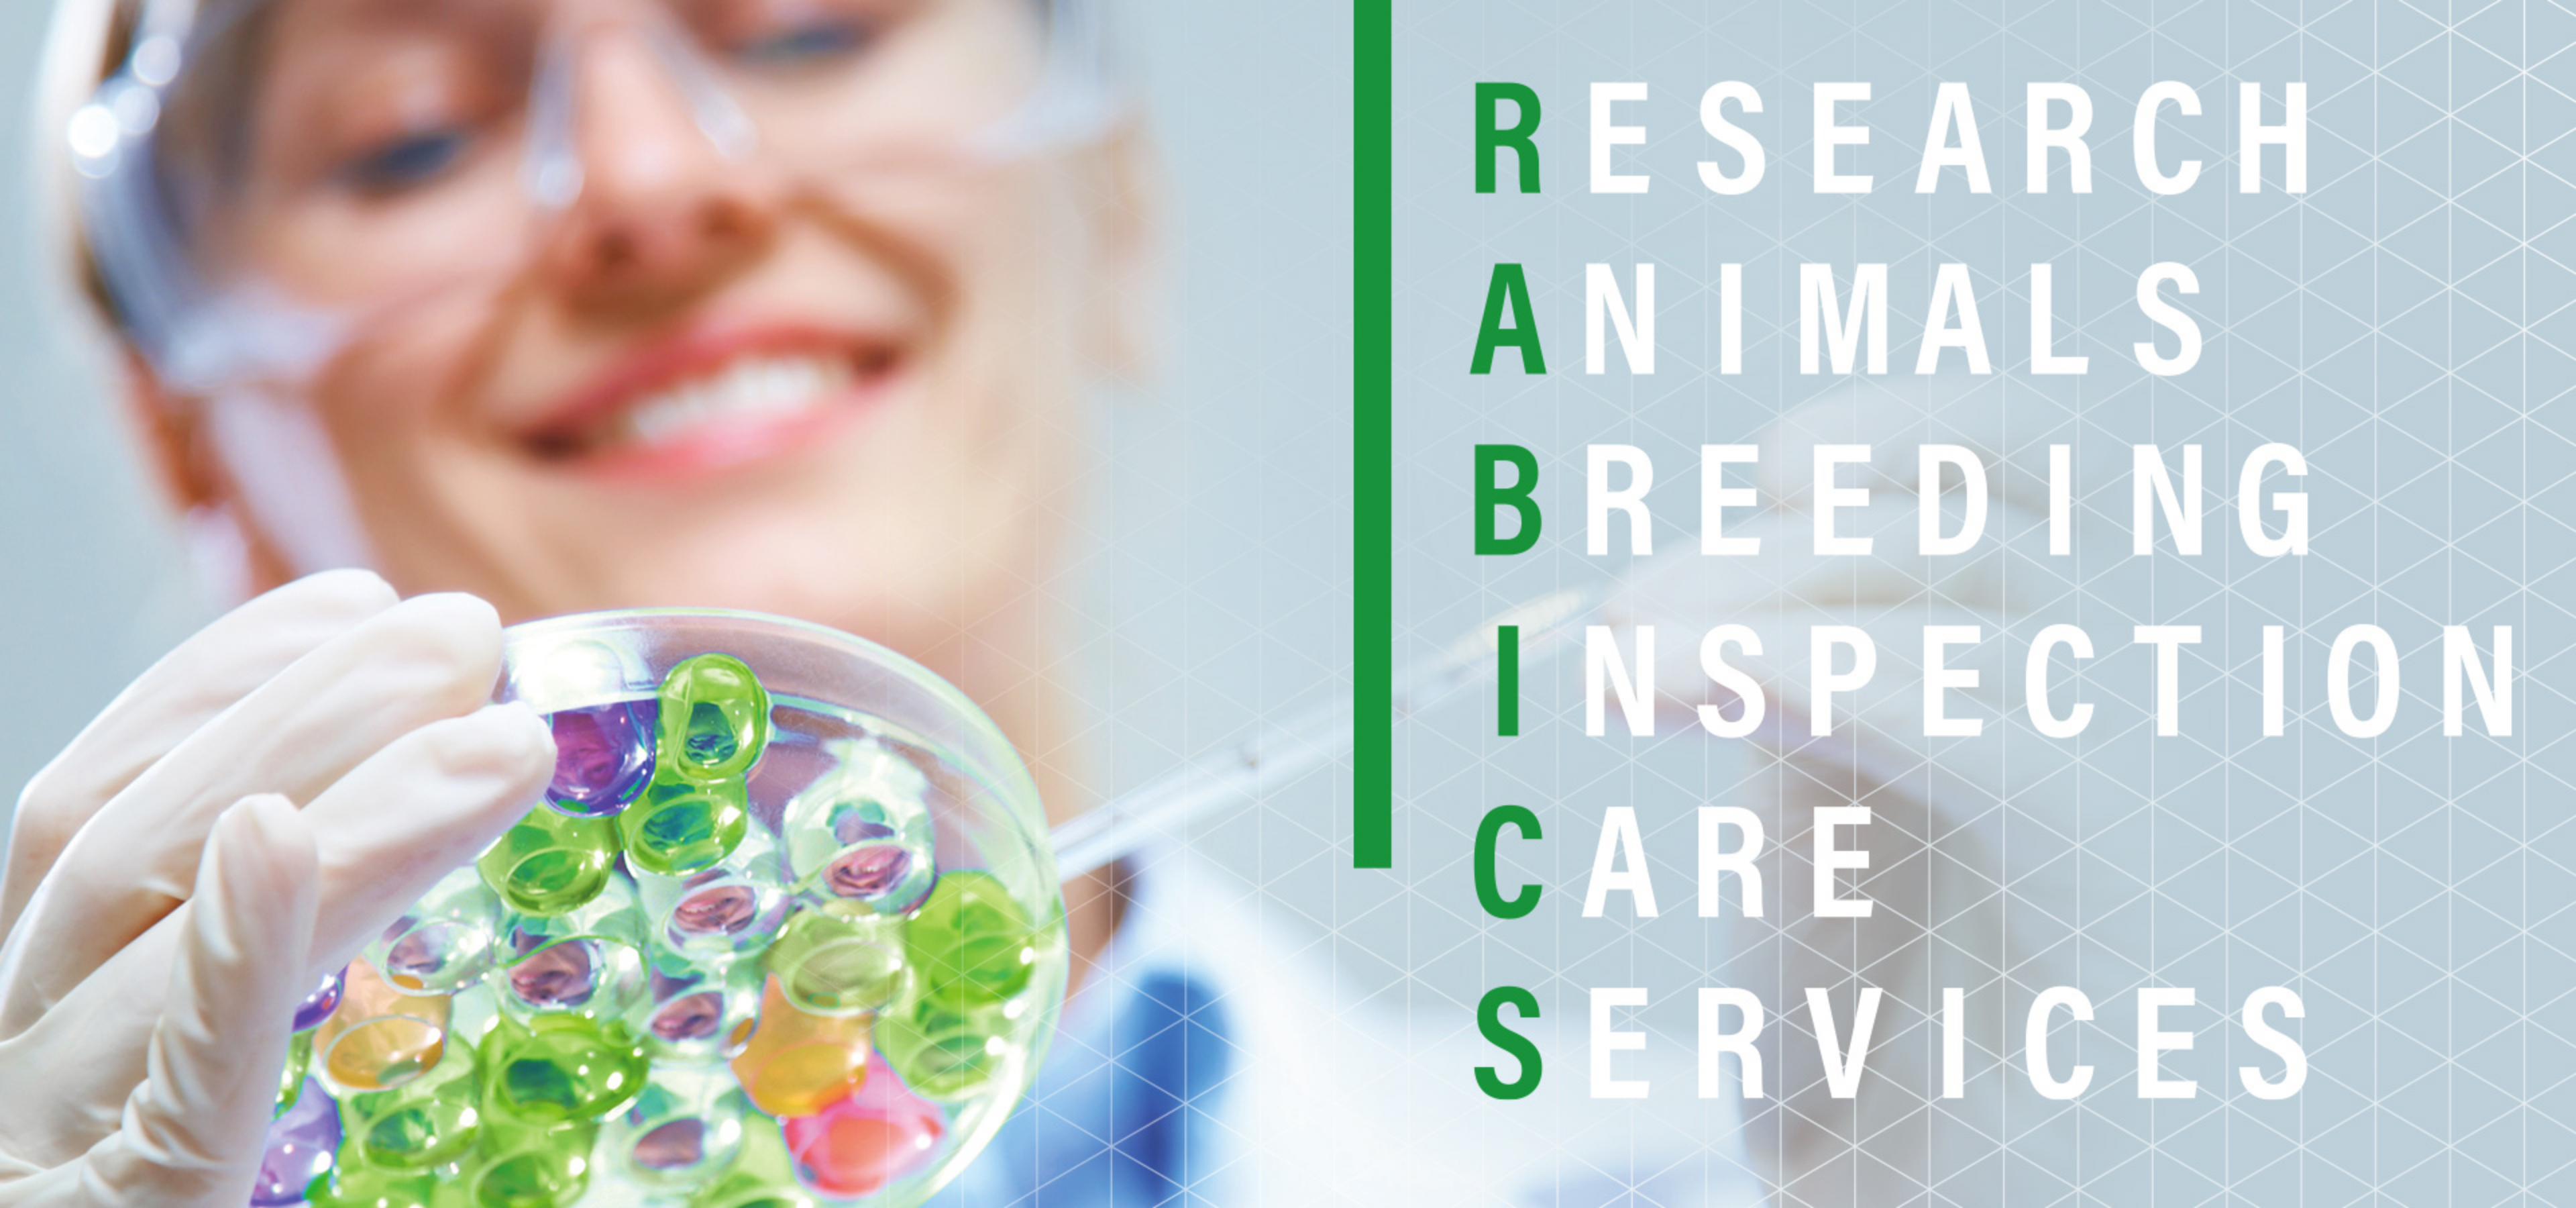 RESEARCH ANIMALS BREEDING INSPECTION CARE SERVICES